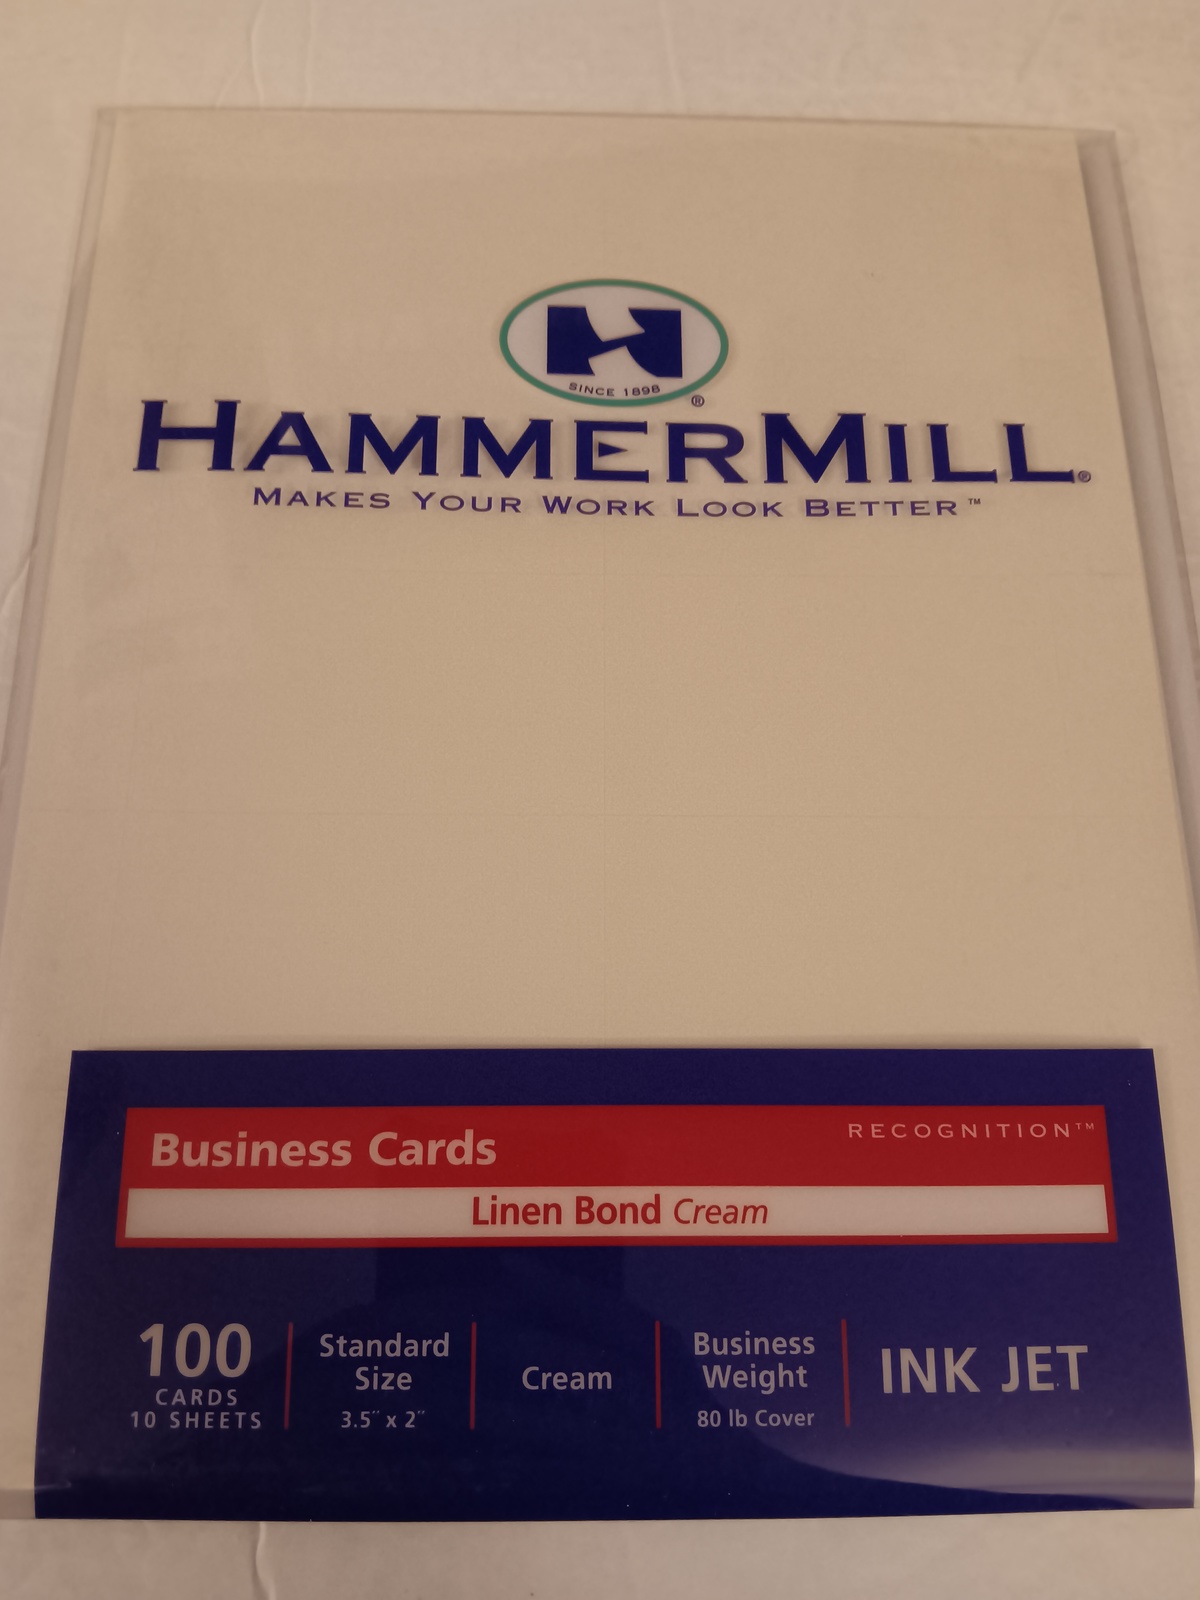 Hammermill Cream Business Cards 10 Sheet Pack (100 Cards) New Sealed - $14.99